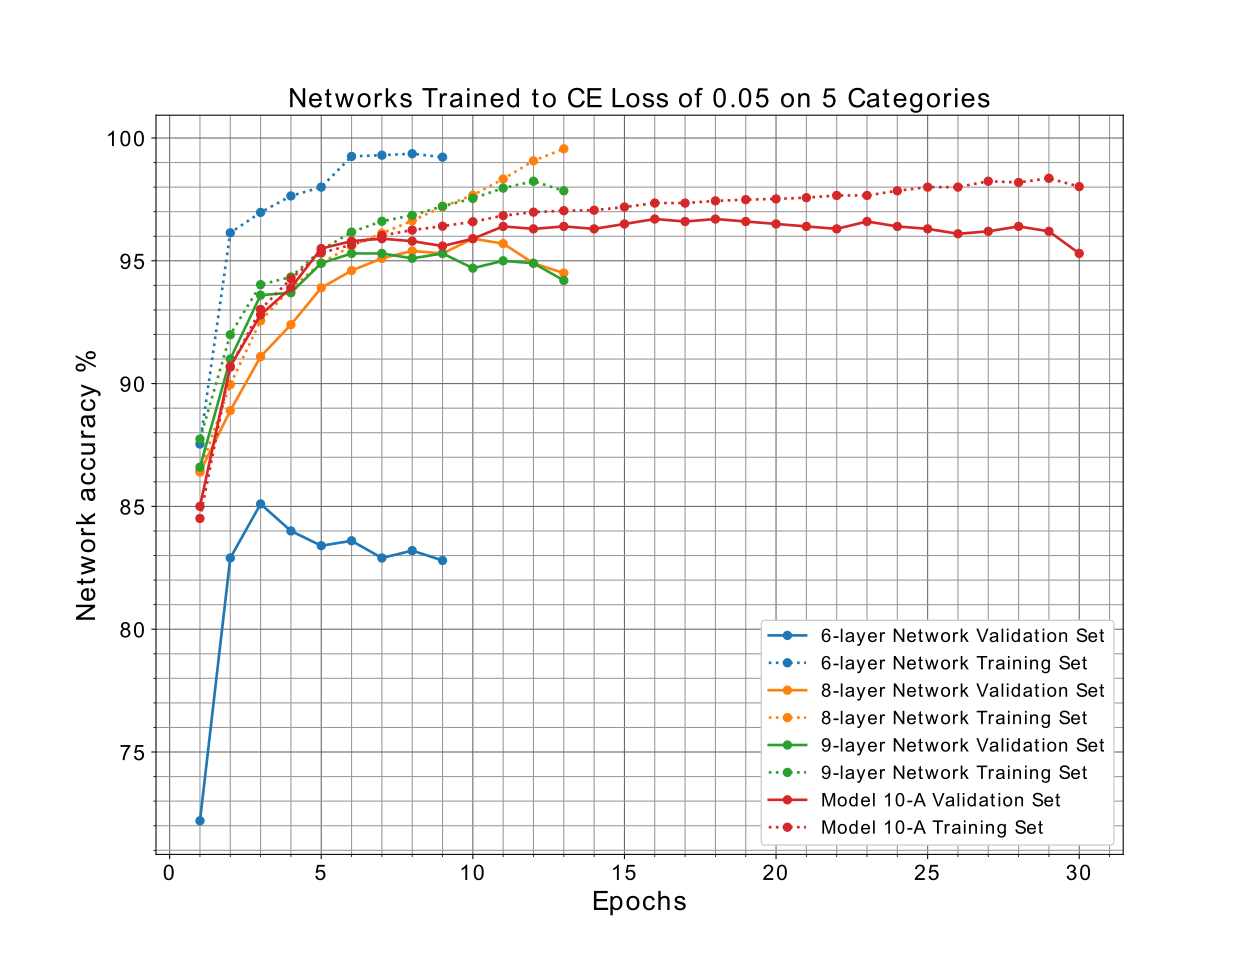 Network accuracy curves